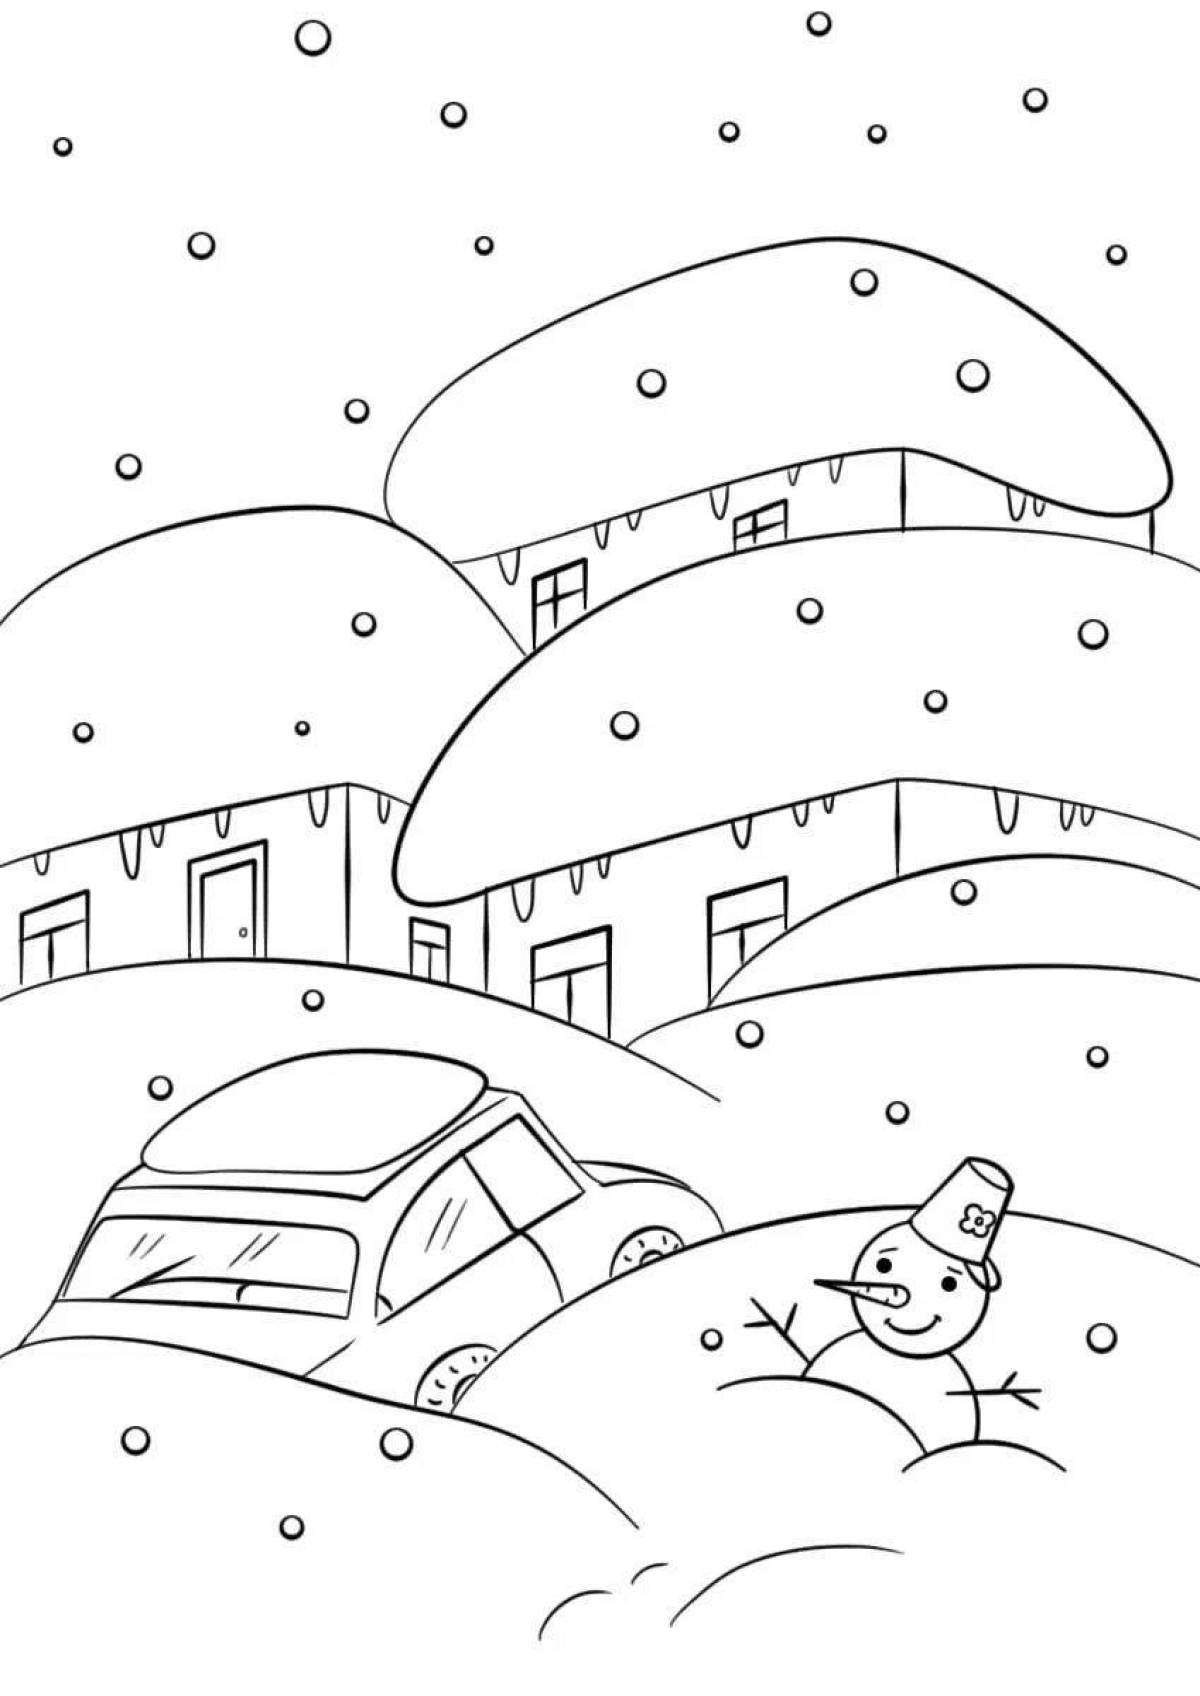 Coloring page charming blizzard